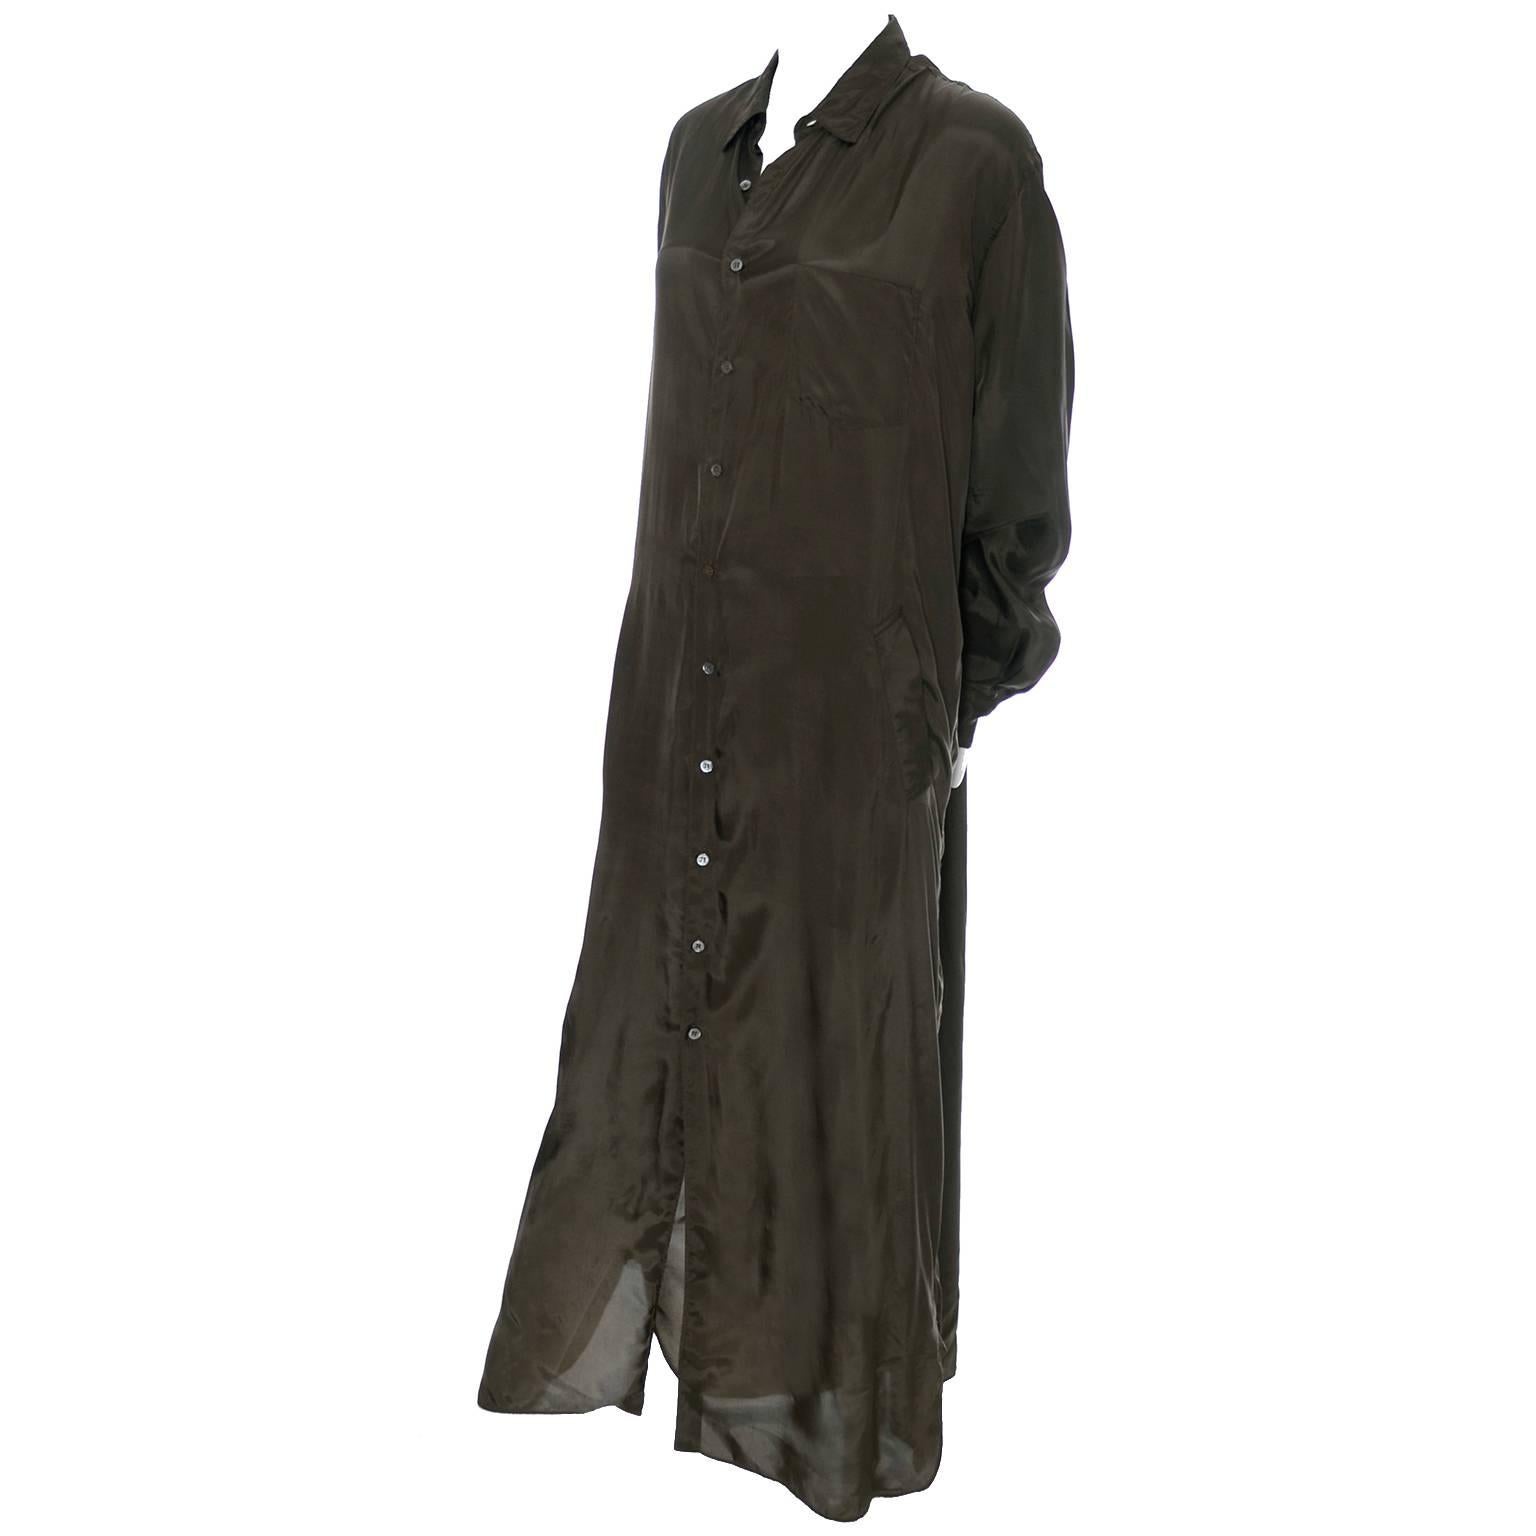 Comme des Garcons 1980s Vintage Fall Green Rayon dress or Long Coat Shirtdress 